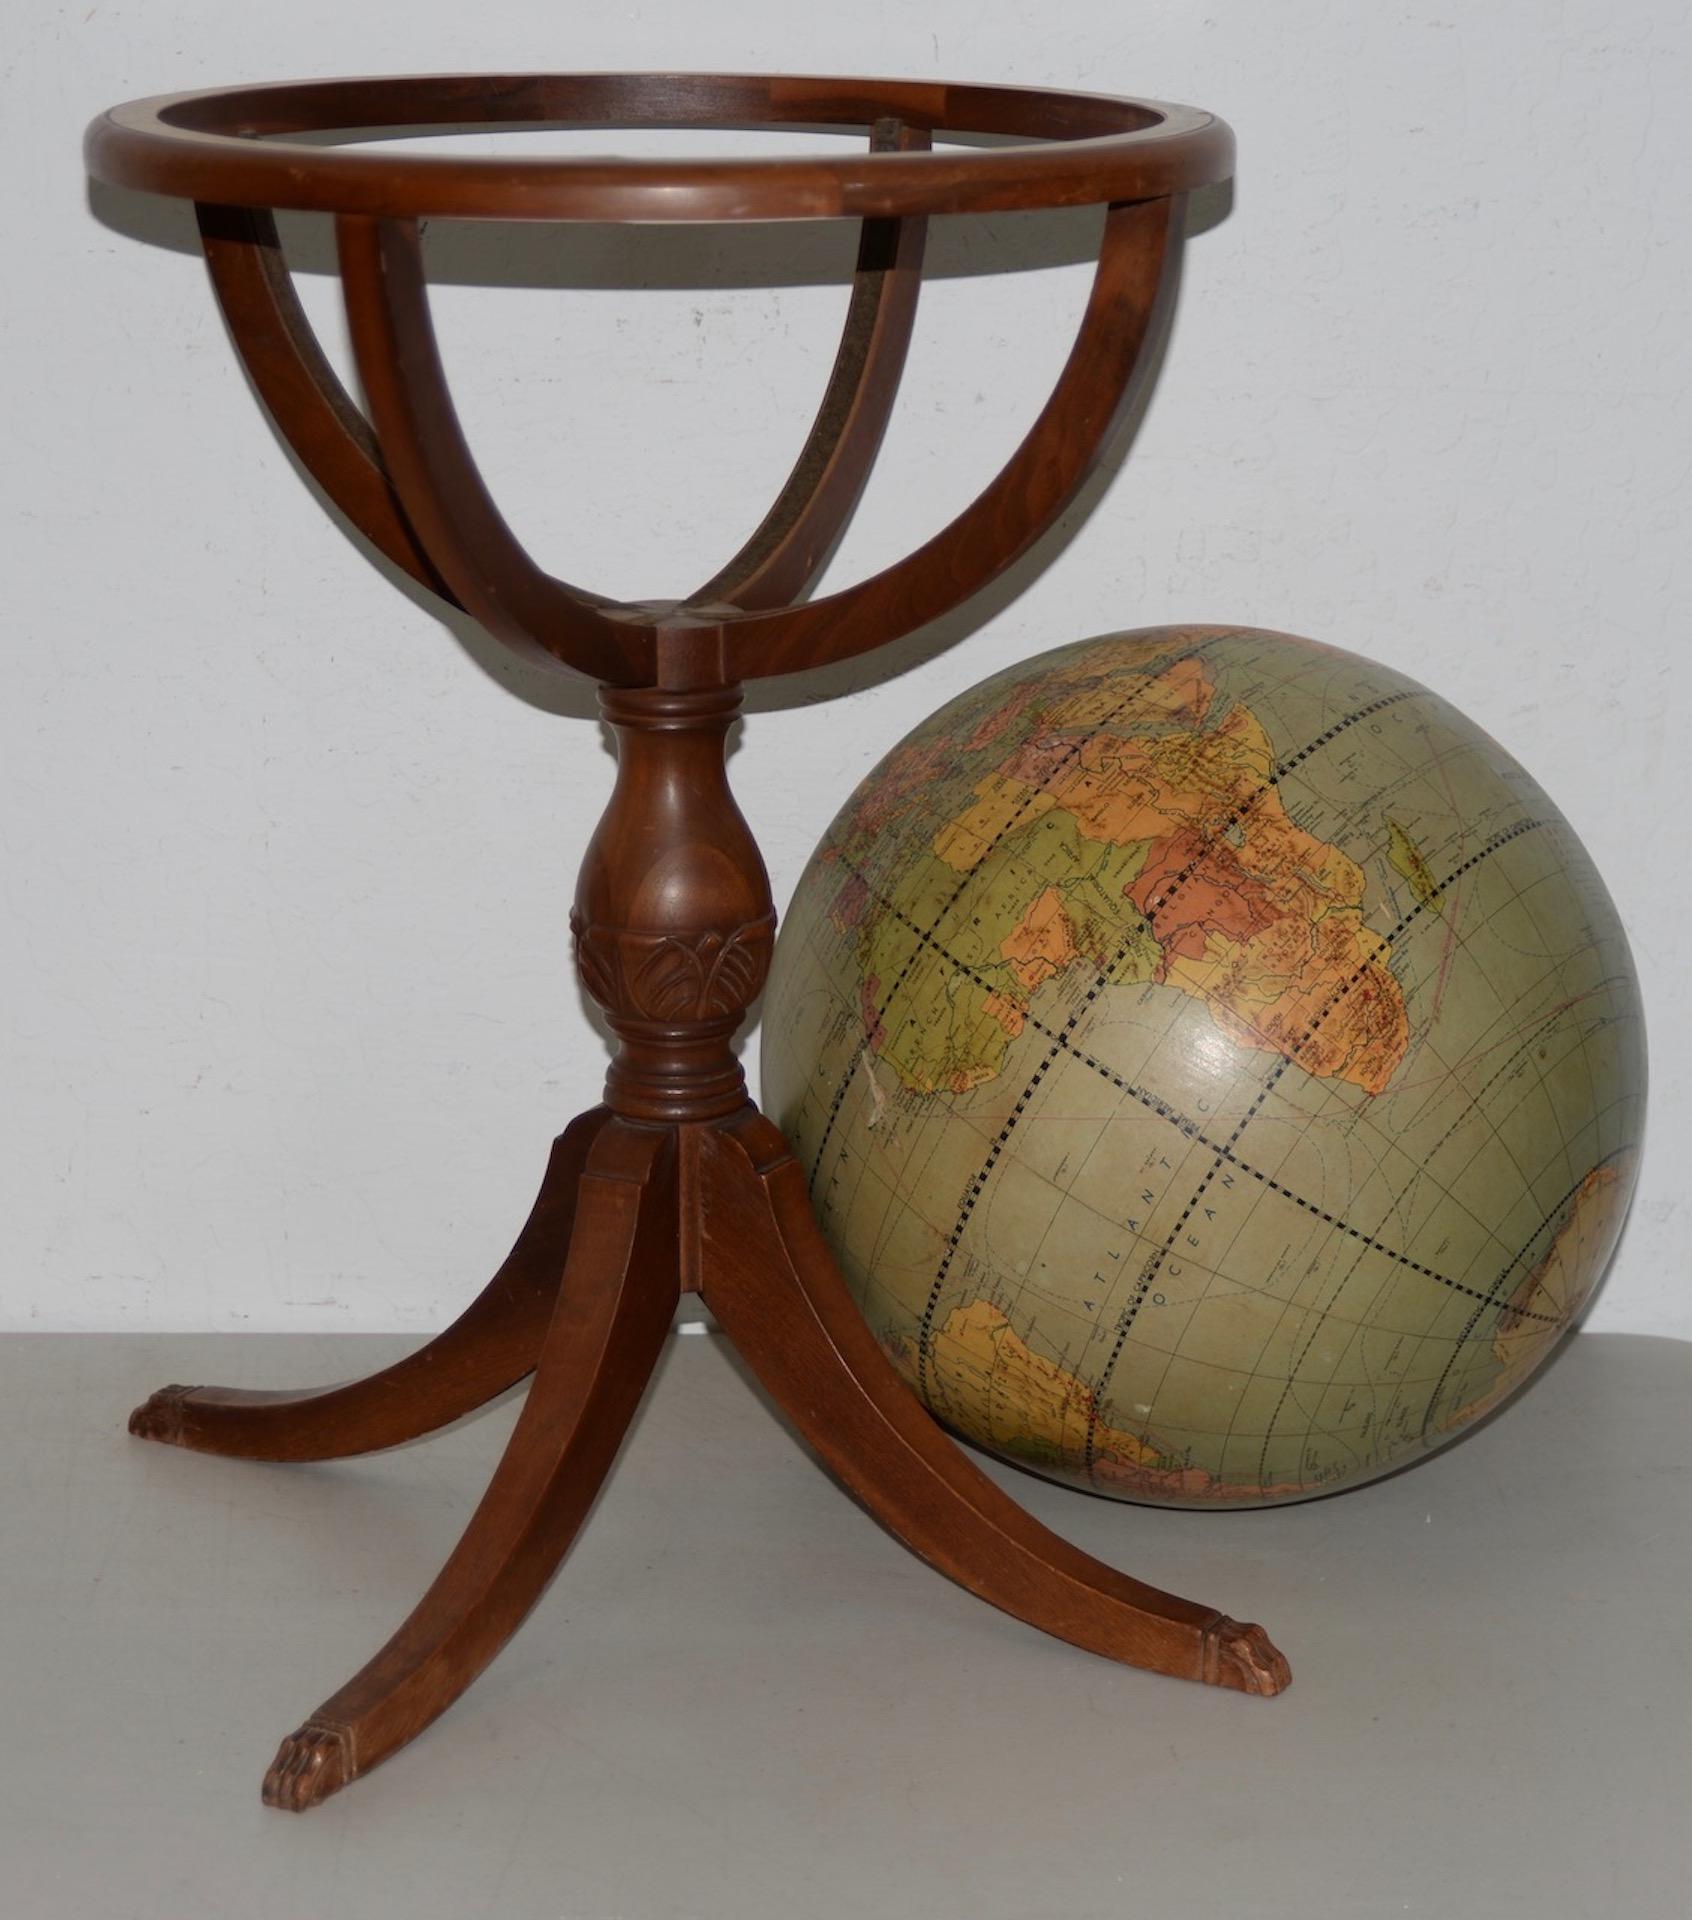 Hand-Crafted Weber Costello Co. Political Reality Globe on Mahogany Pedestal Stand circa 1940